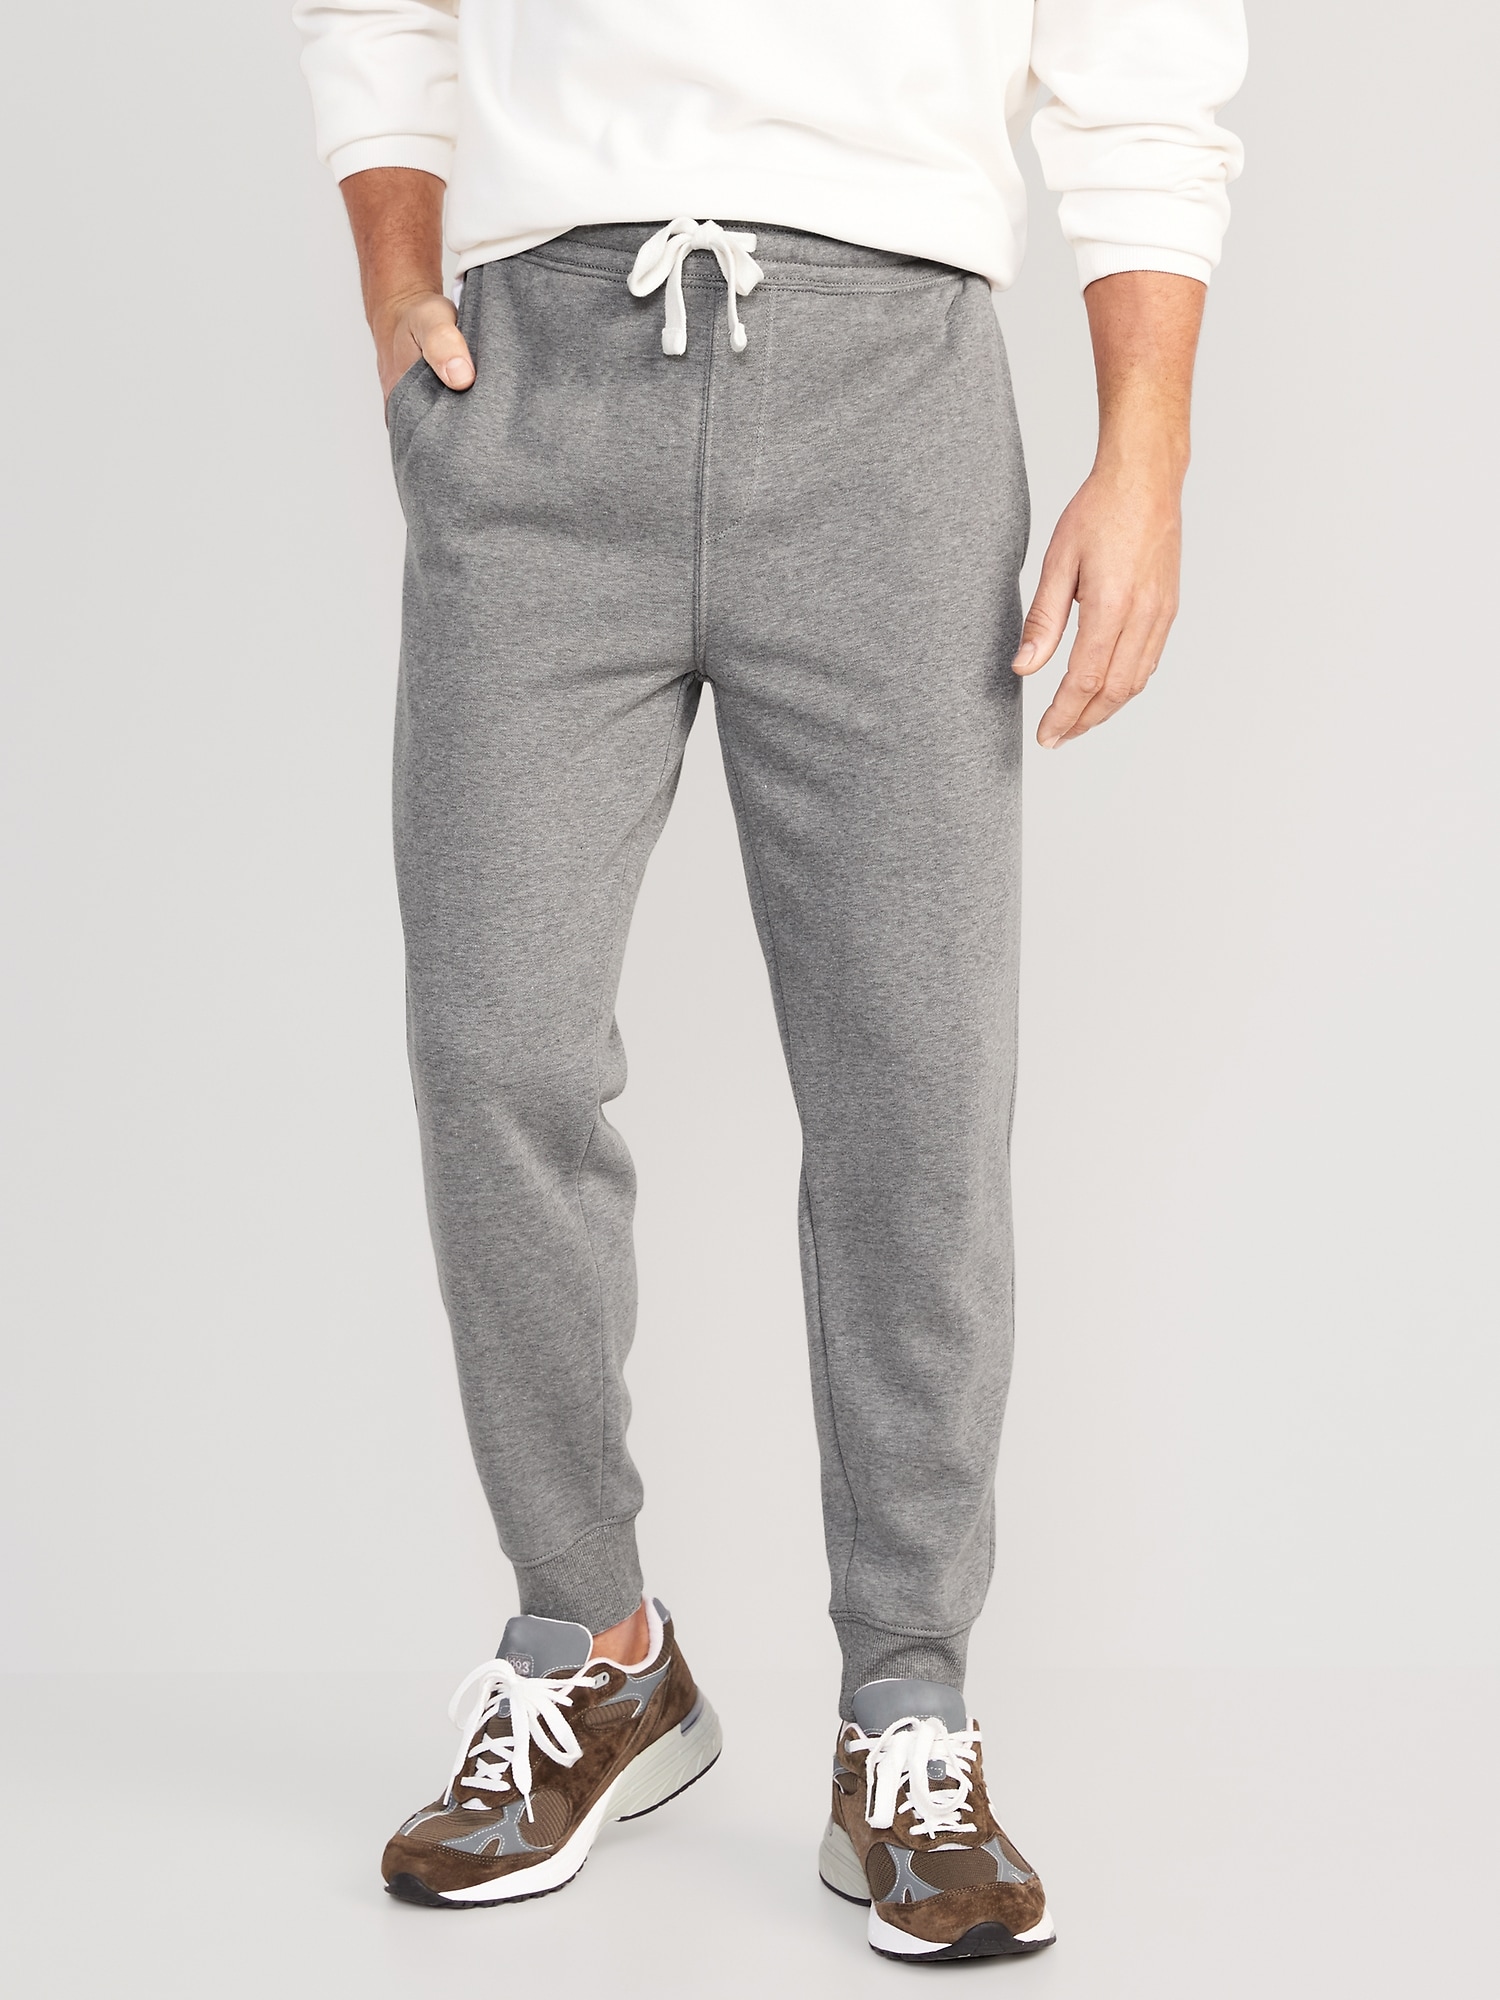 Women's Joggers With Cuffs